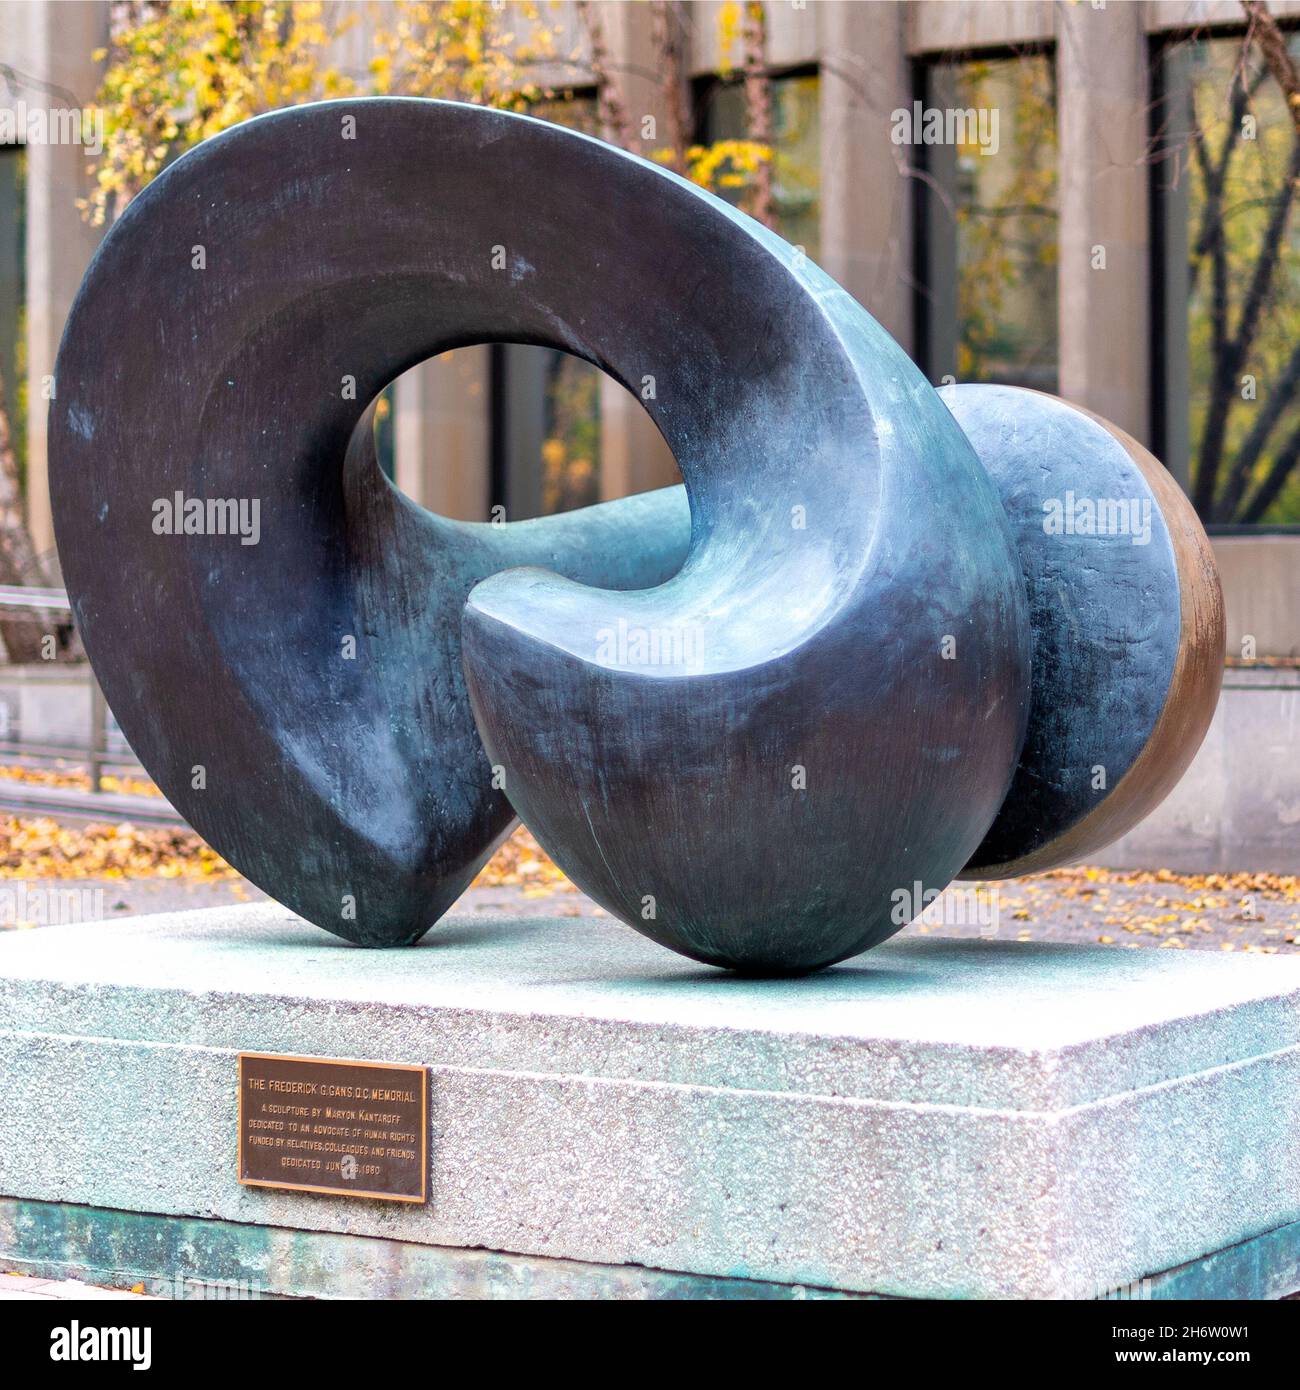 Urban sculpture named The Frederick G. Gans, Q.C. Memorial by Maryon Kantaroff seen in the McMurtry Gardens of Justice in the downtown districtNov. 18 Stock Photo